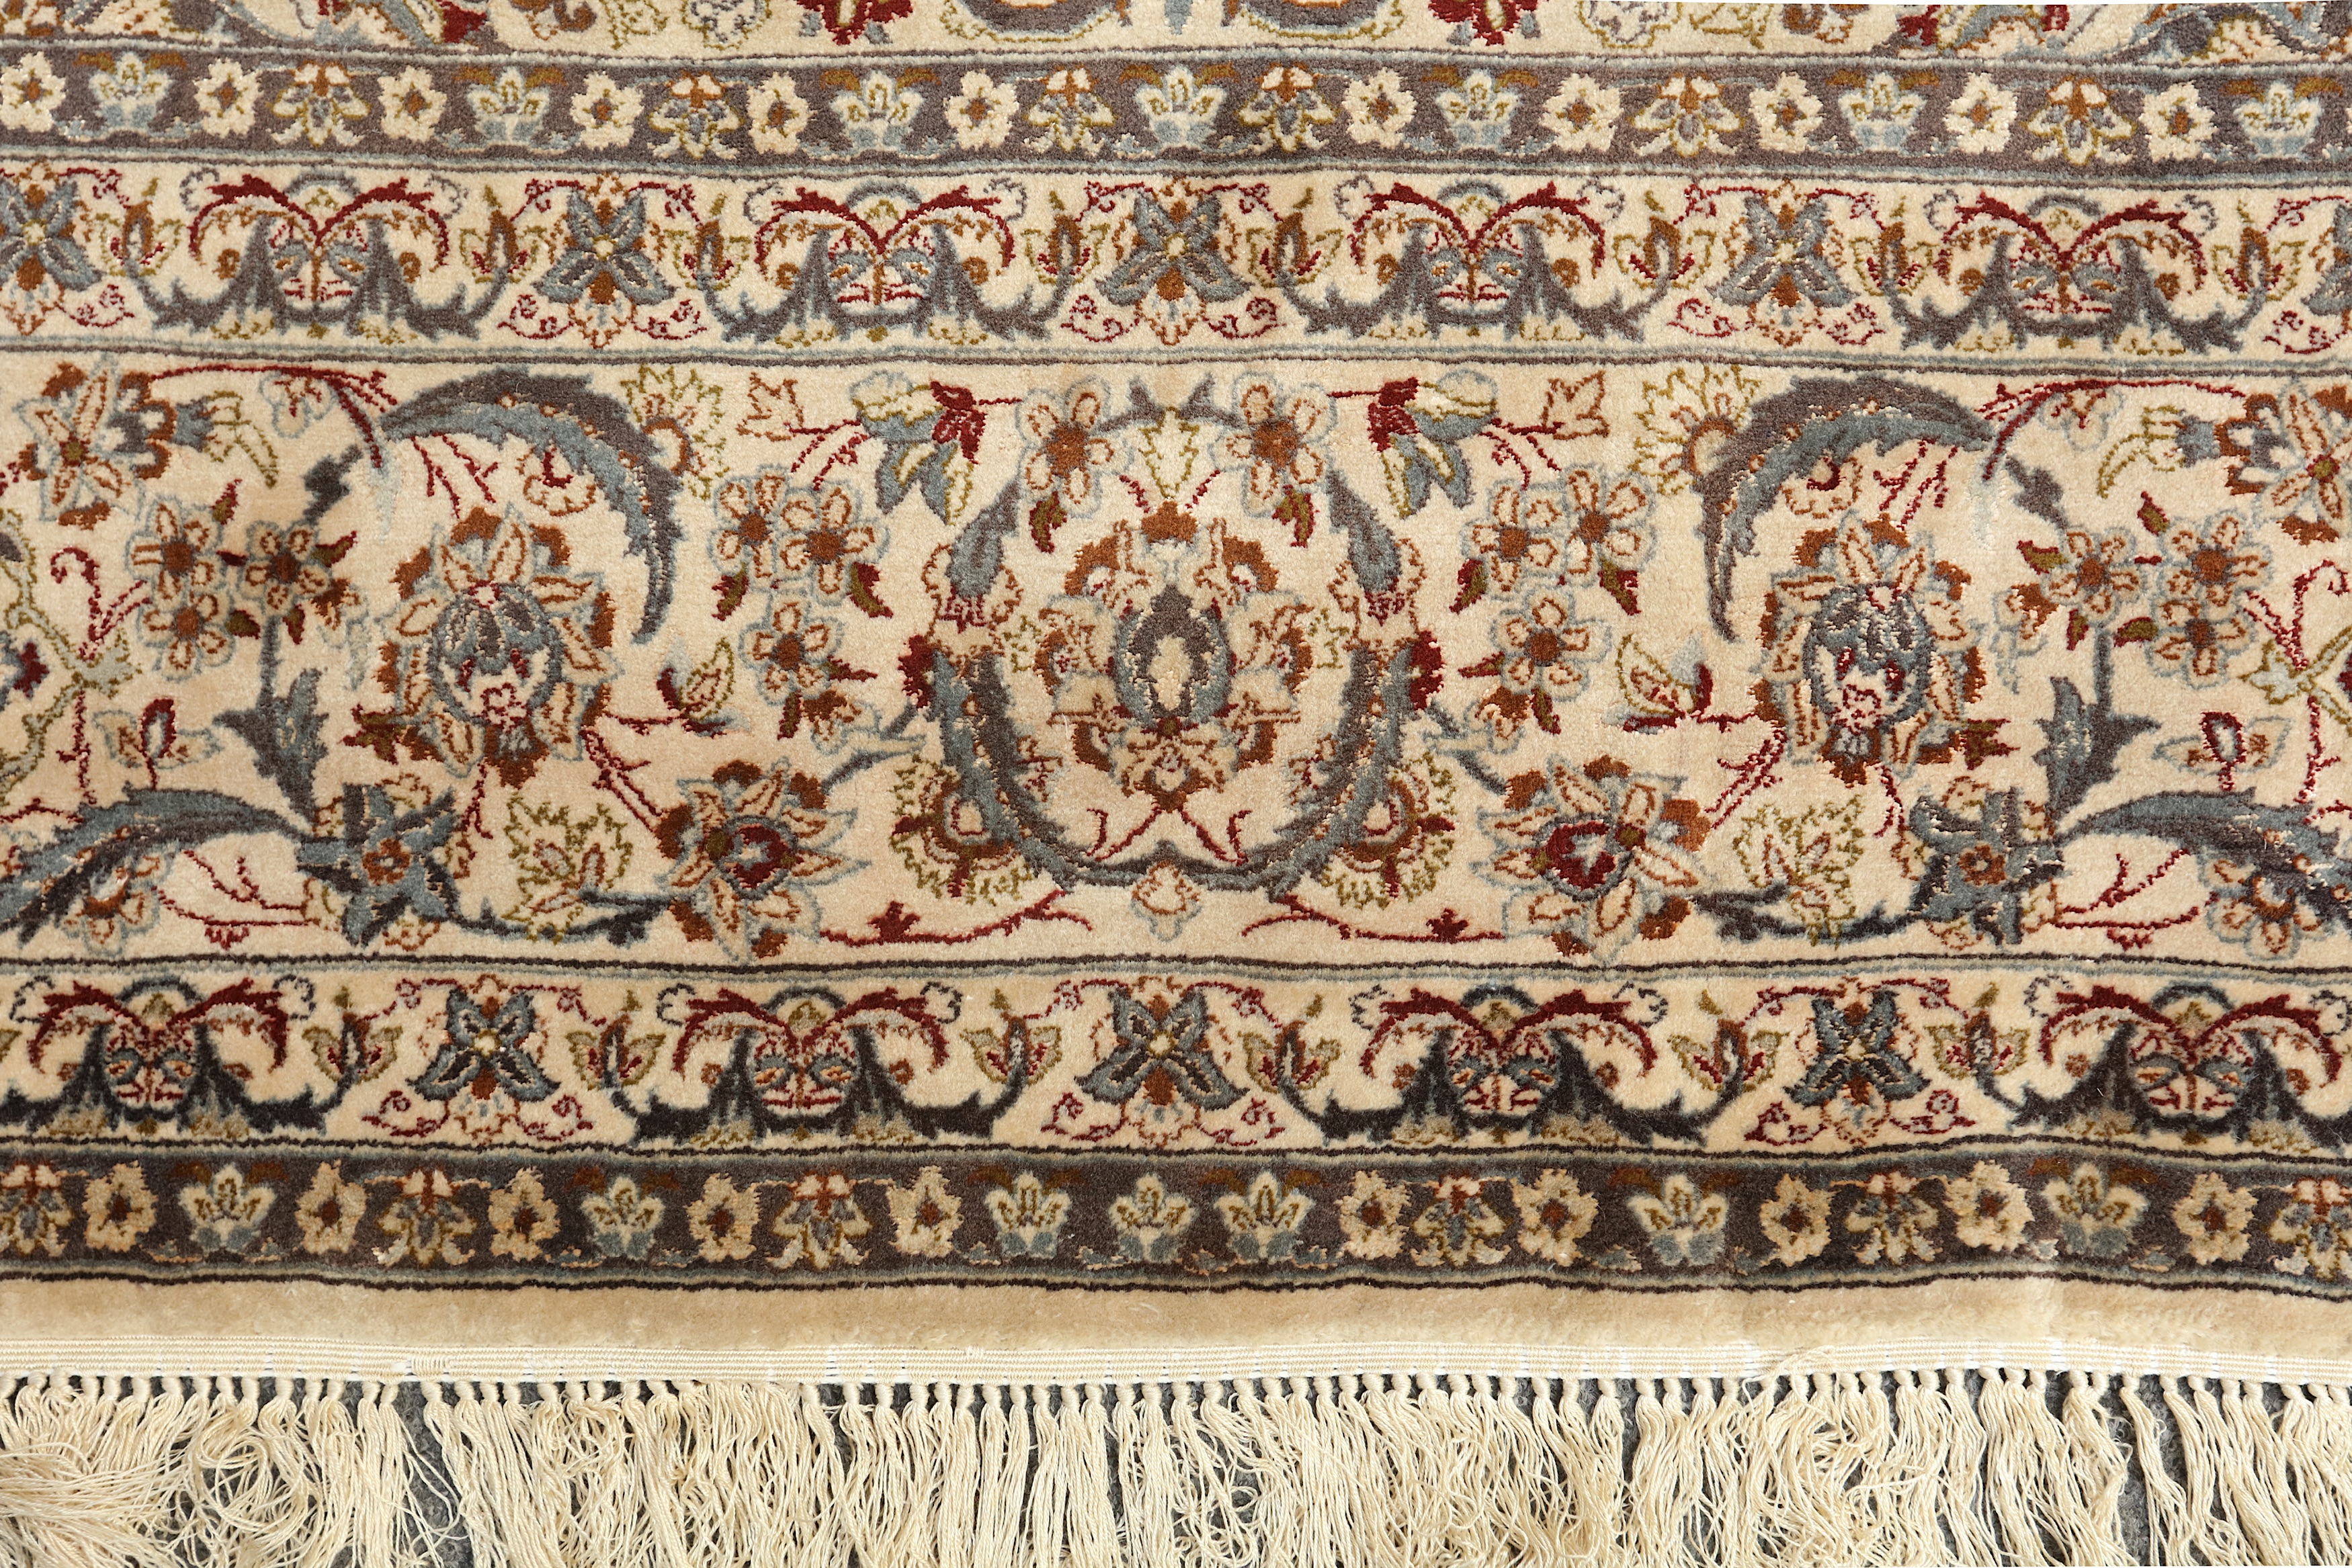 VERY FINE PART SILK ISFAHAN RUG, CENTRAL PERSIA - Image 6 of 8